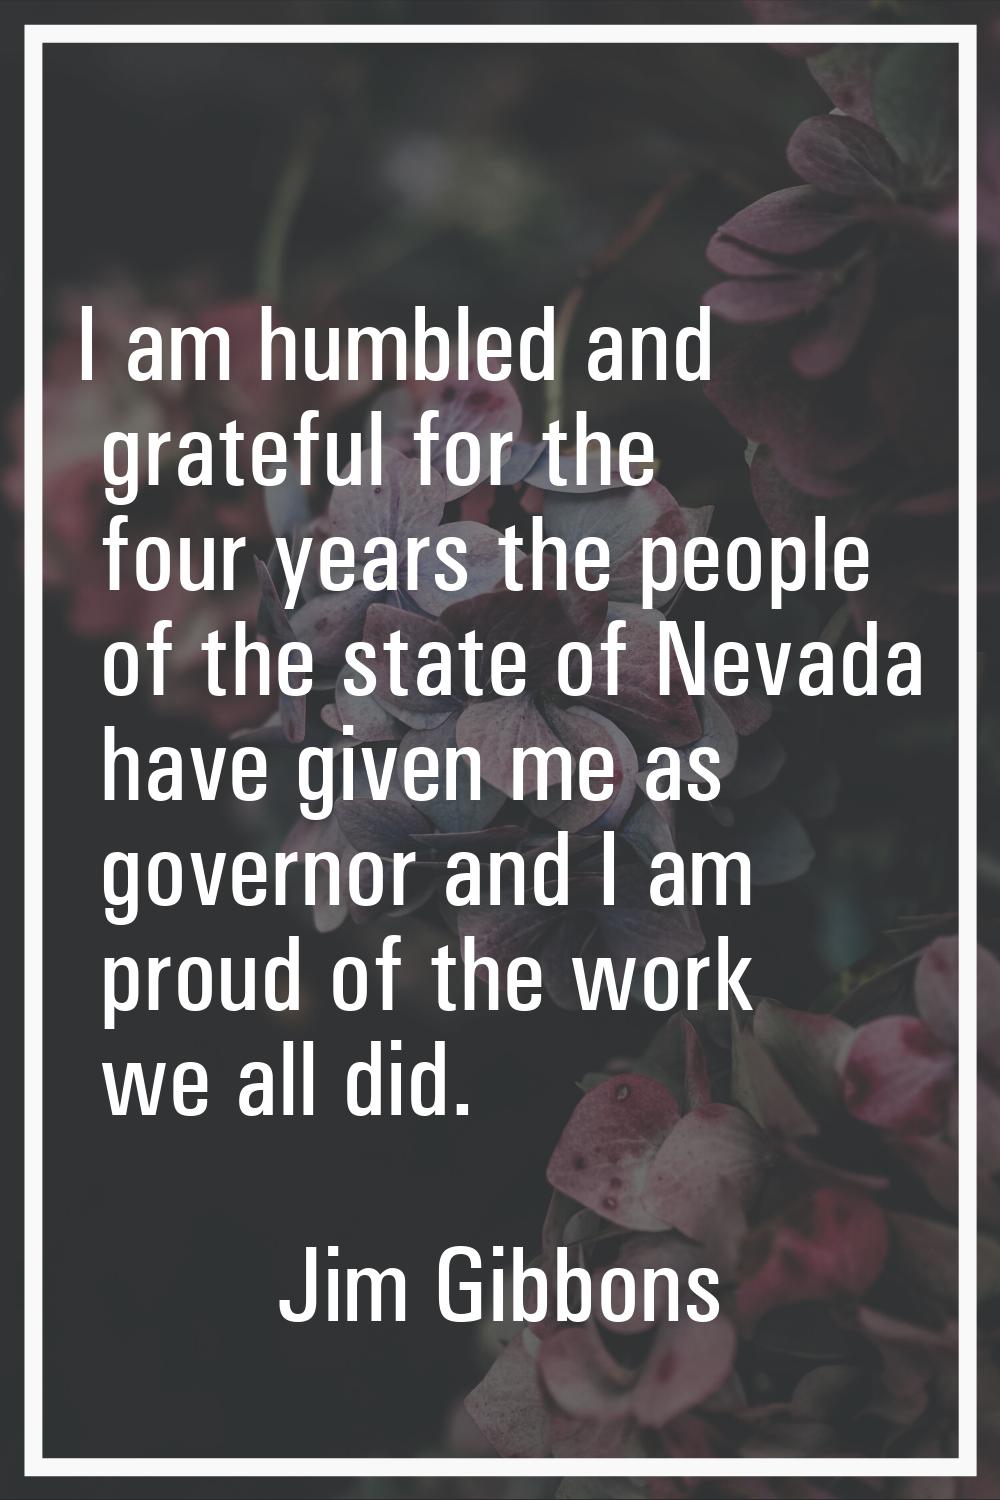 I am humbled and grateful for the four years the people of the state of Nevada have given me as gov